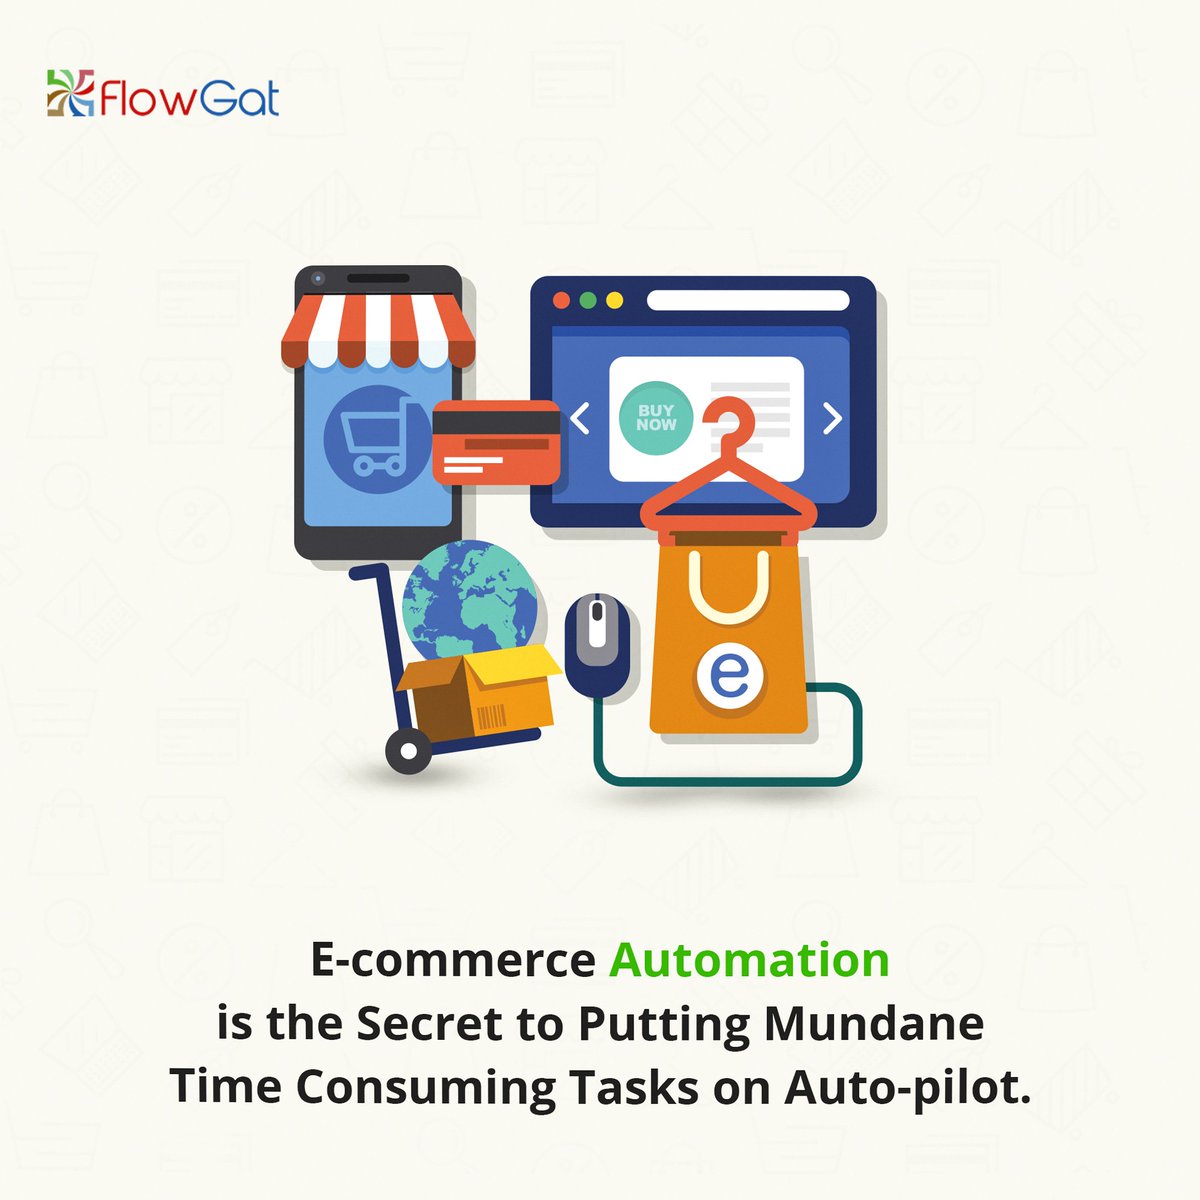 What routine tasks would you like to automate to fuel your e-commerce business? Let us know in the comments below. 
👇👇
#Flowgat #automate #intelligentautomation  #processautomation #businessprocessautomation #smartflow #APIAutomation #IOTAutomation #Automation #Technology